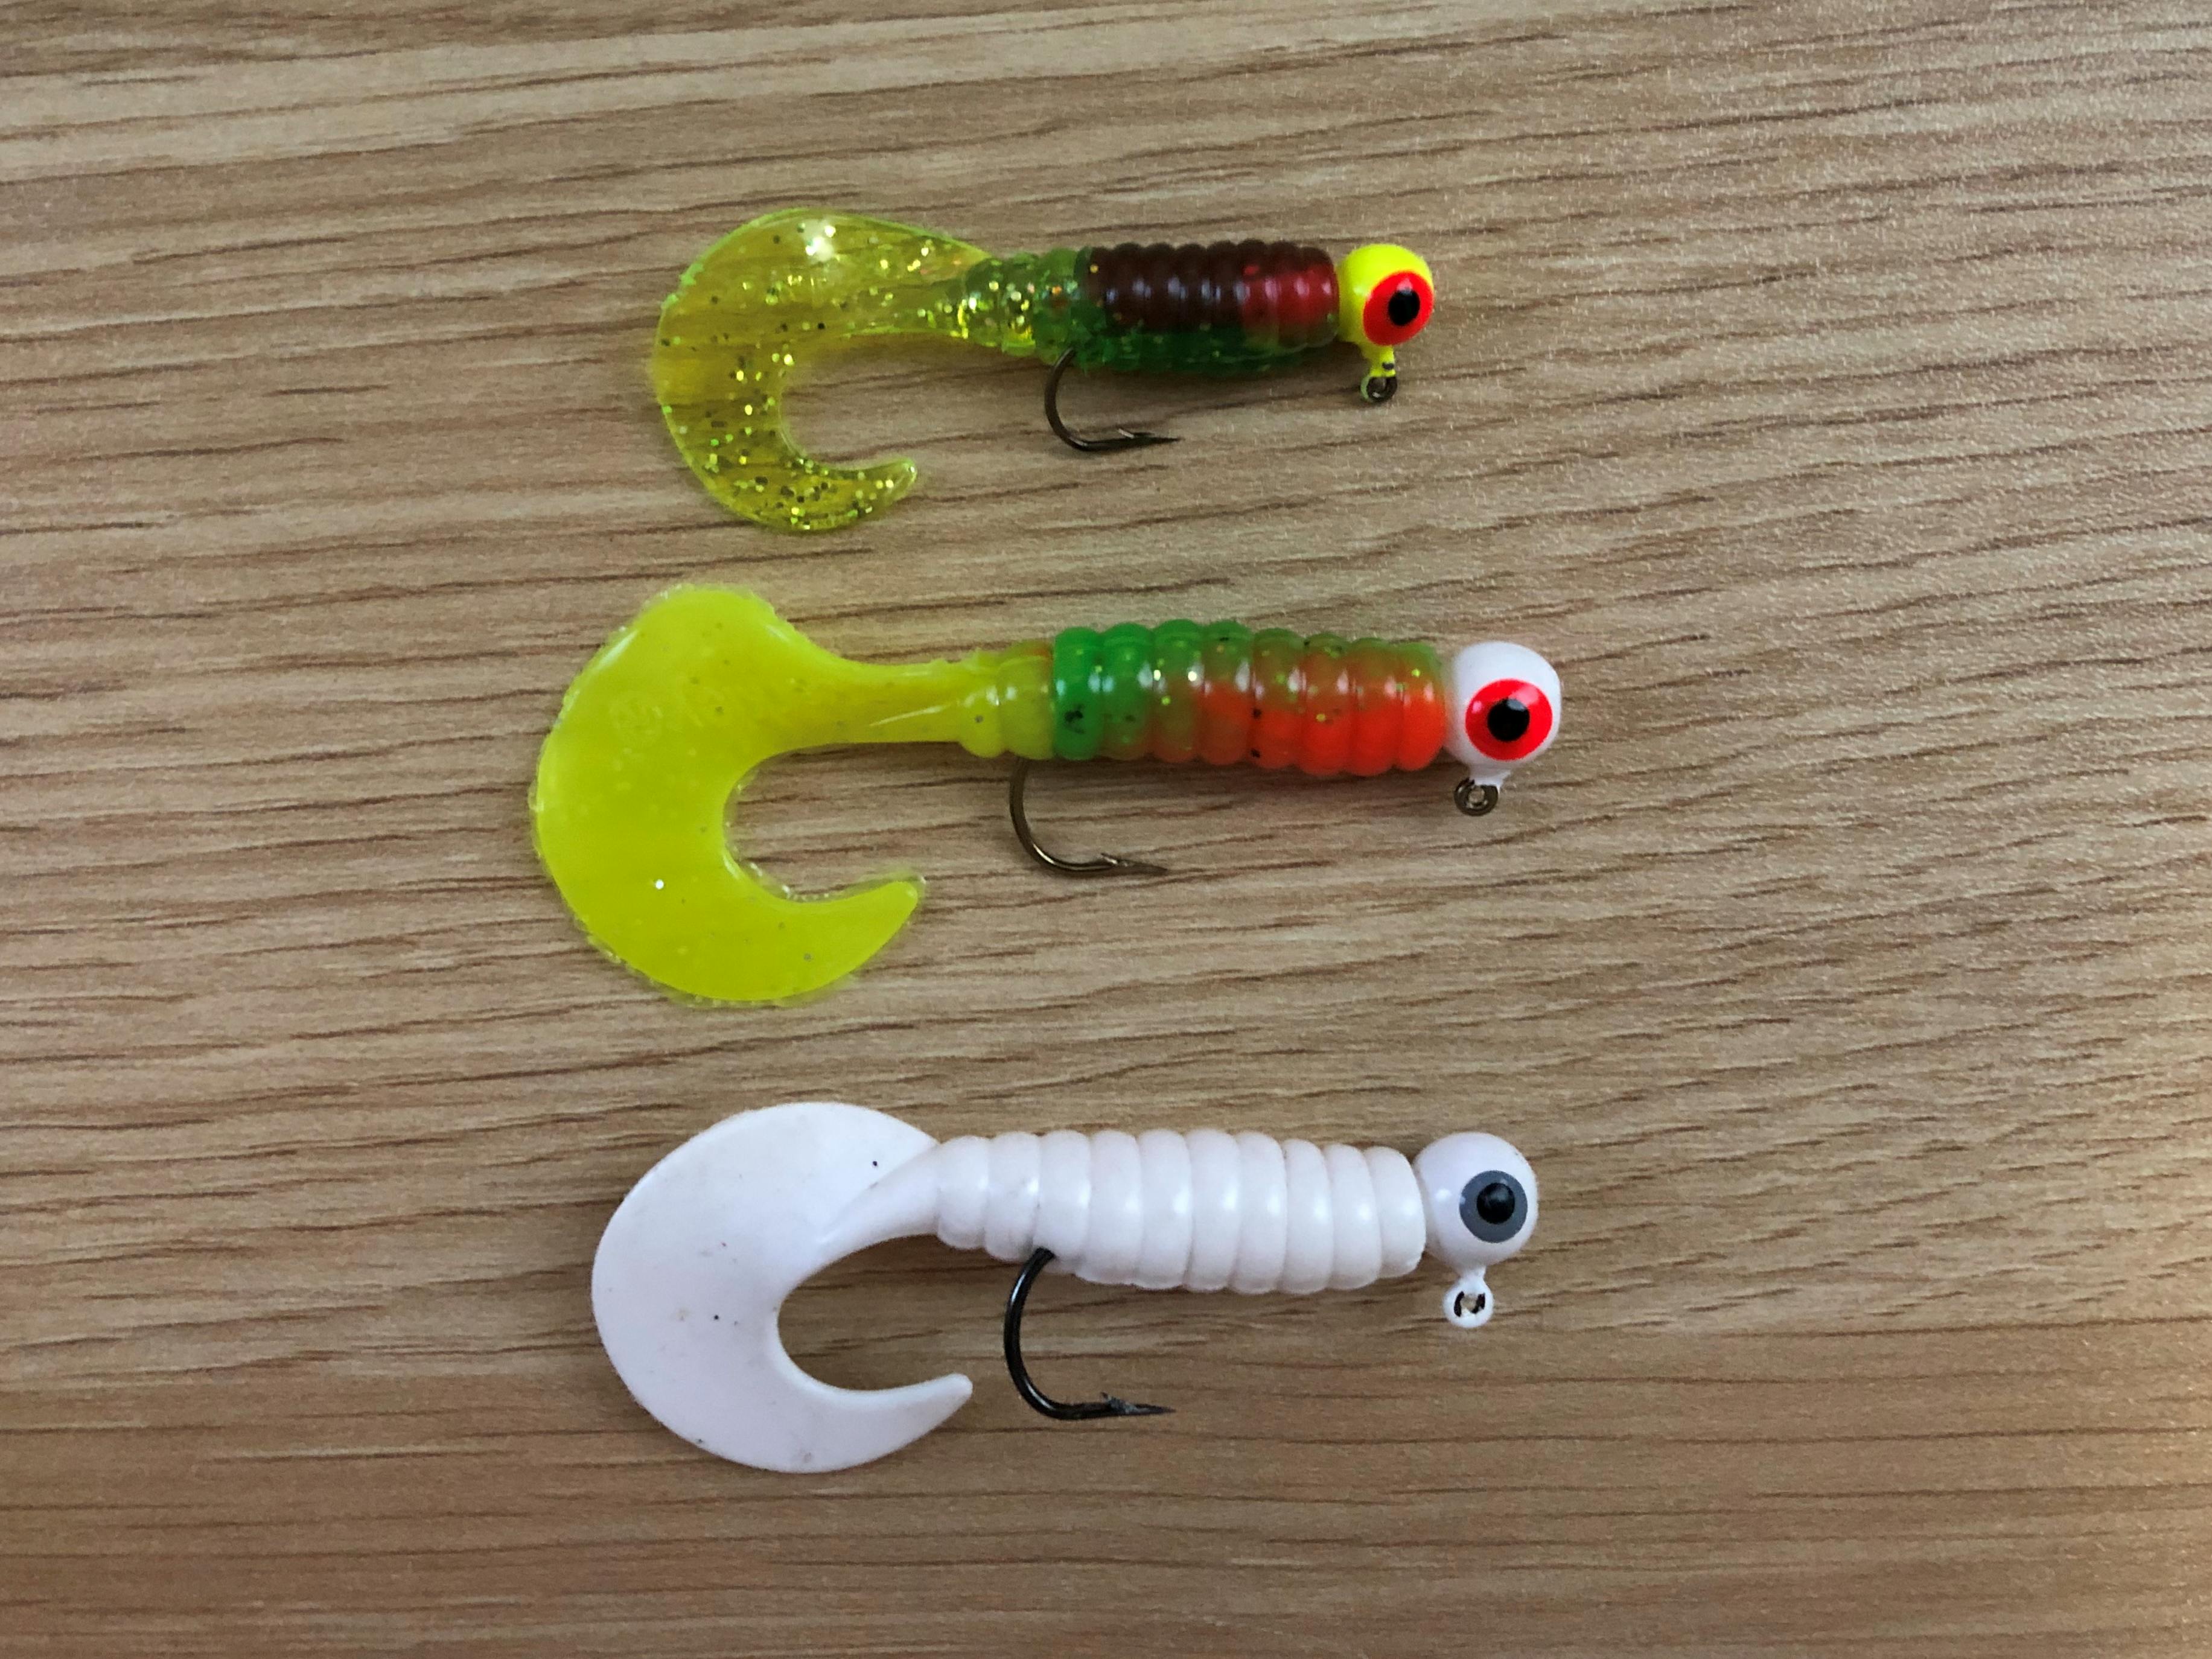 The Most Underrated Fishing Lure of All Time: The Twister Tail Grub